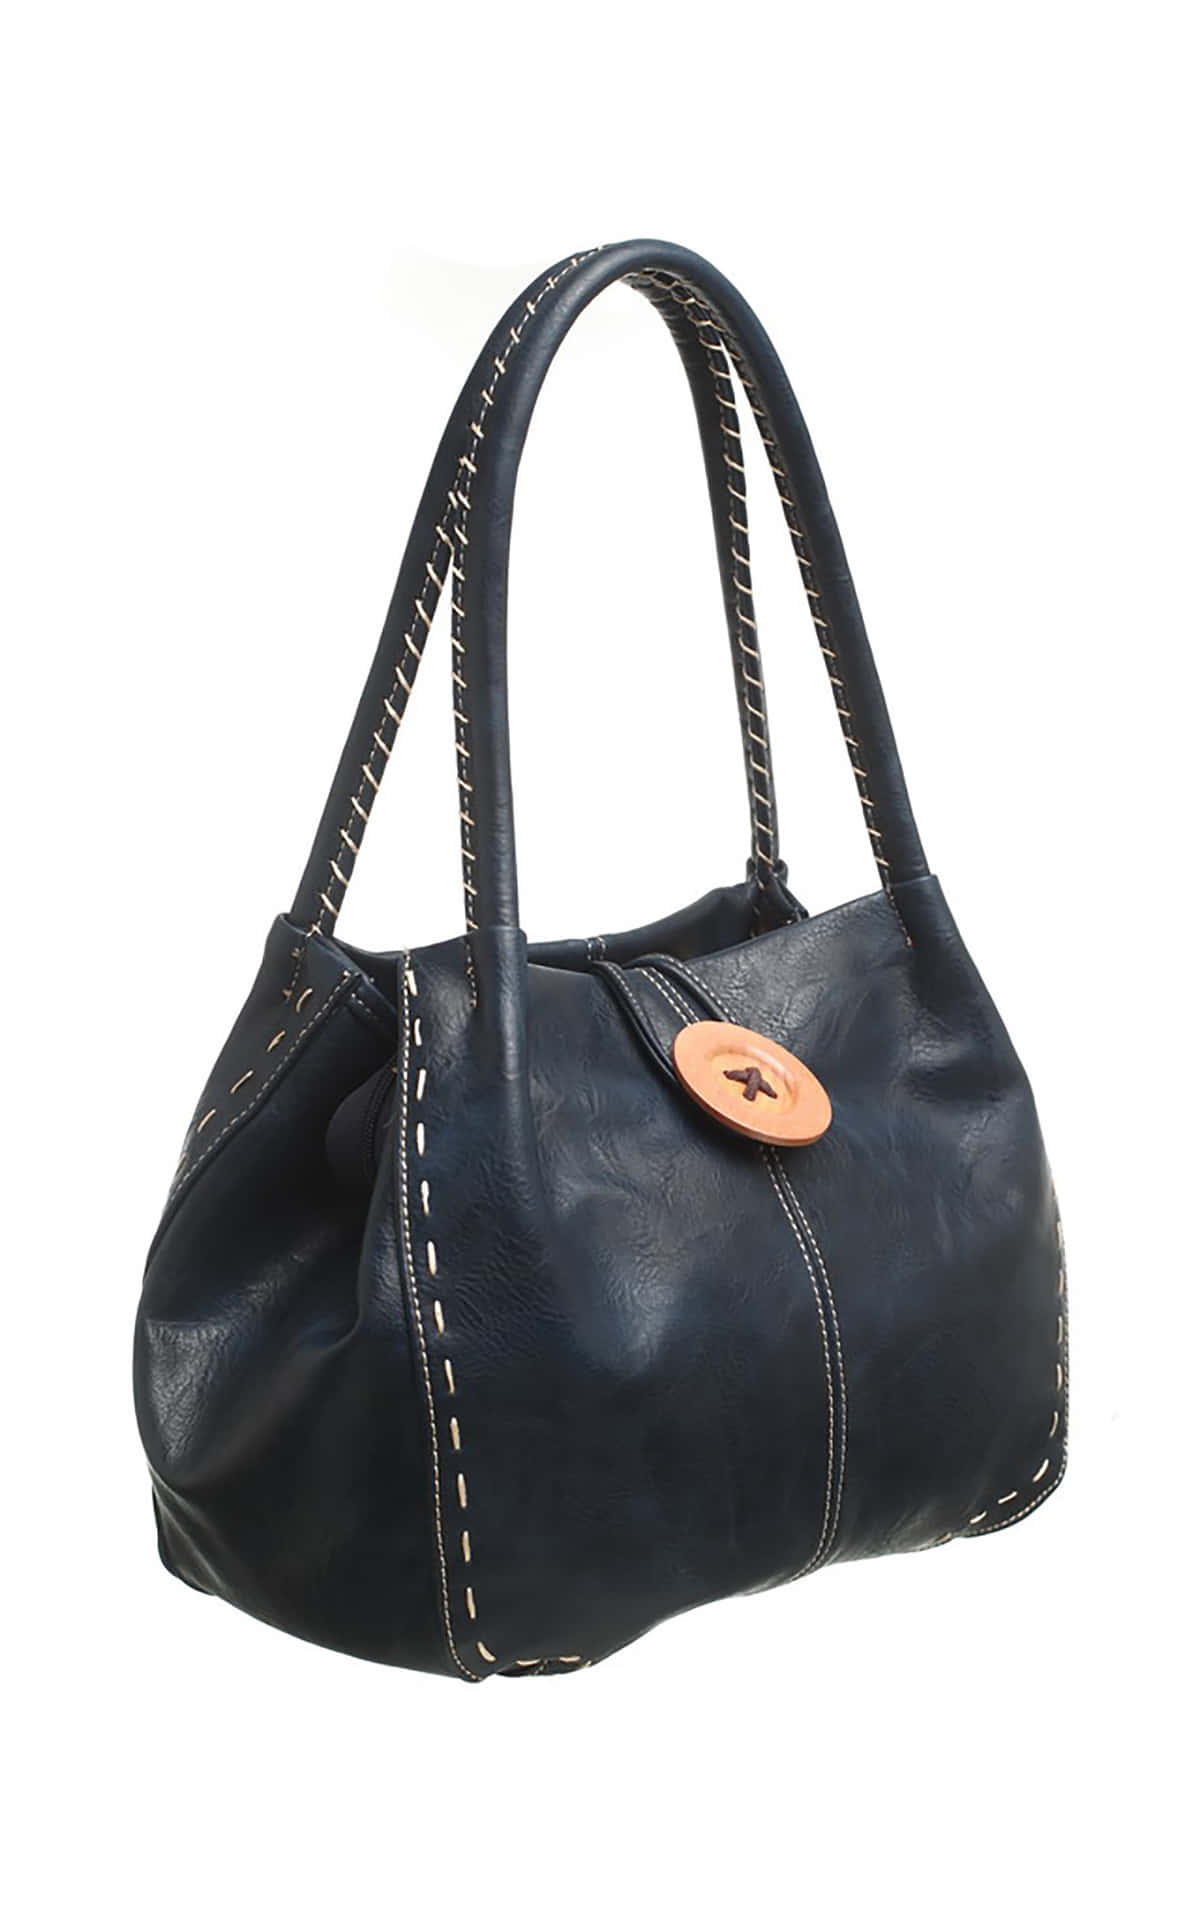 A Black Leather Handbag With A Brown Handle